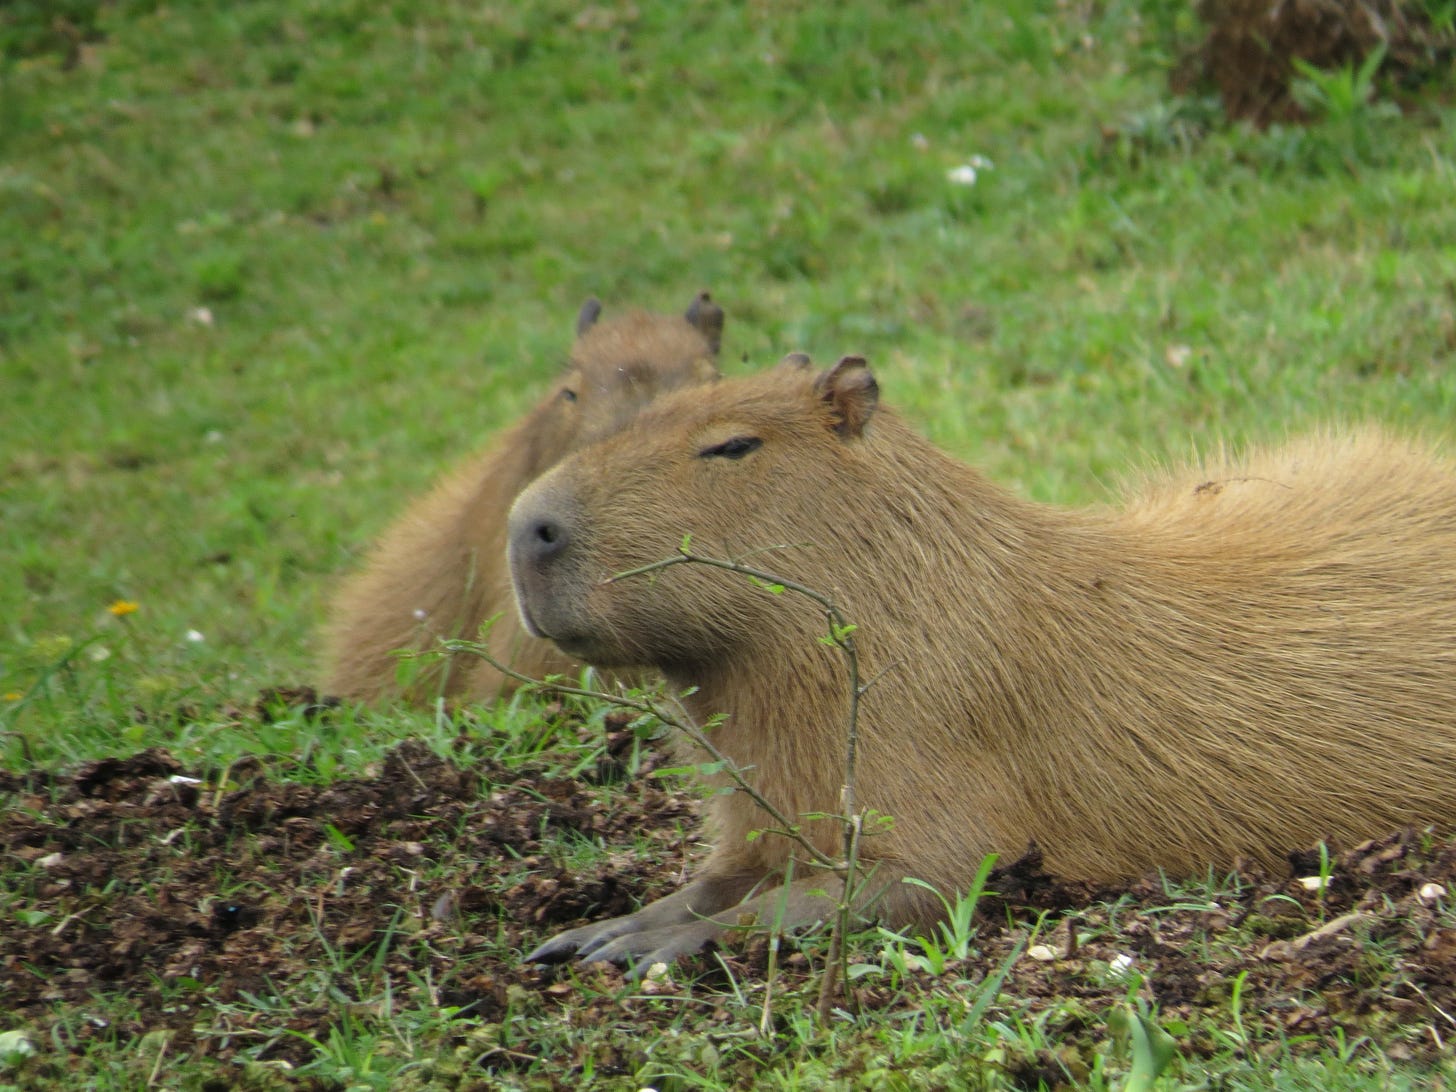 A wild capybara giving the camera the side-eye while sitting in grass